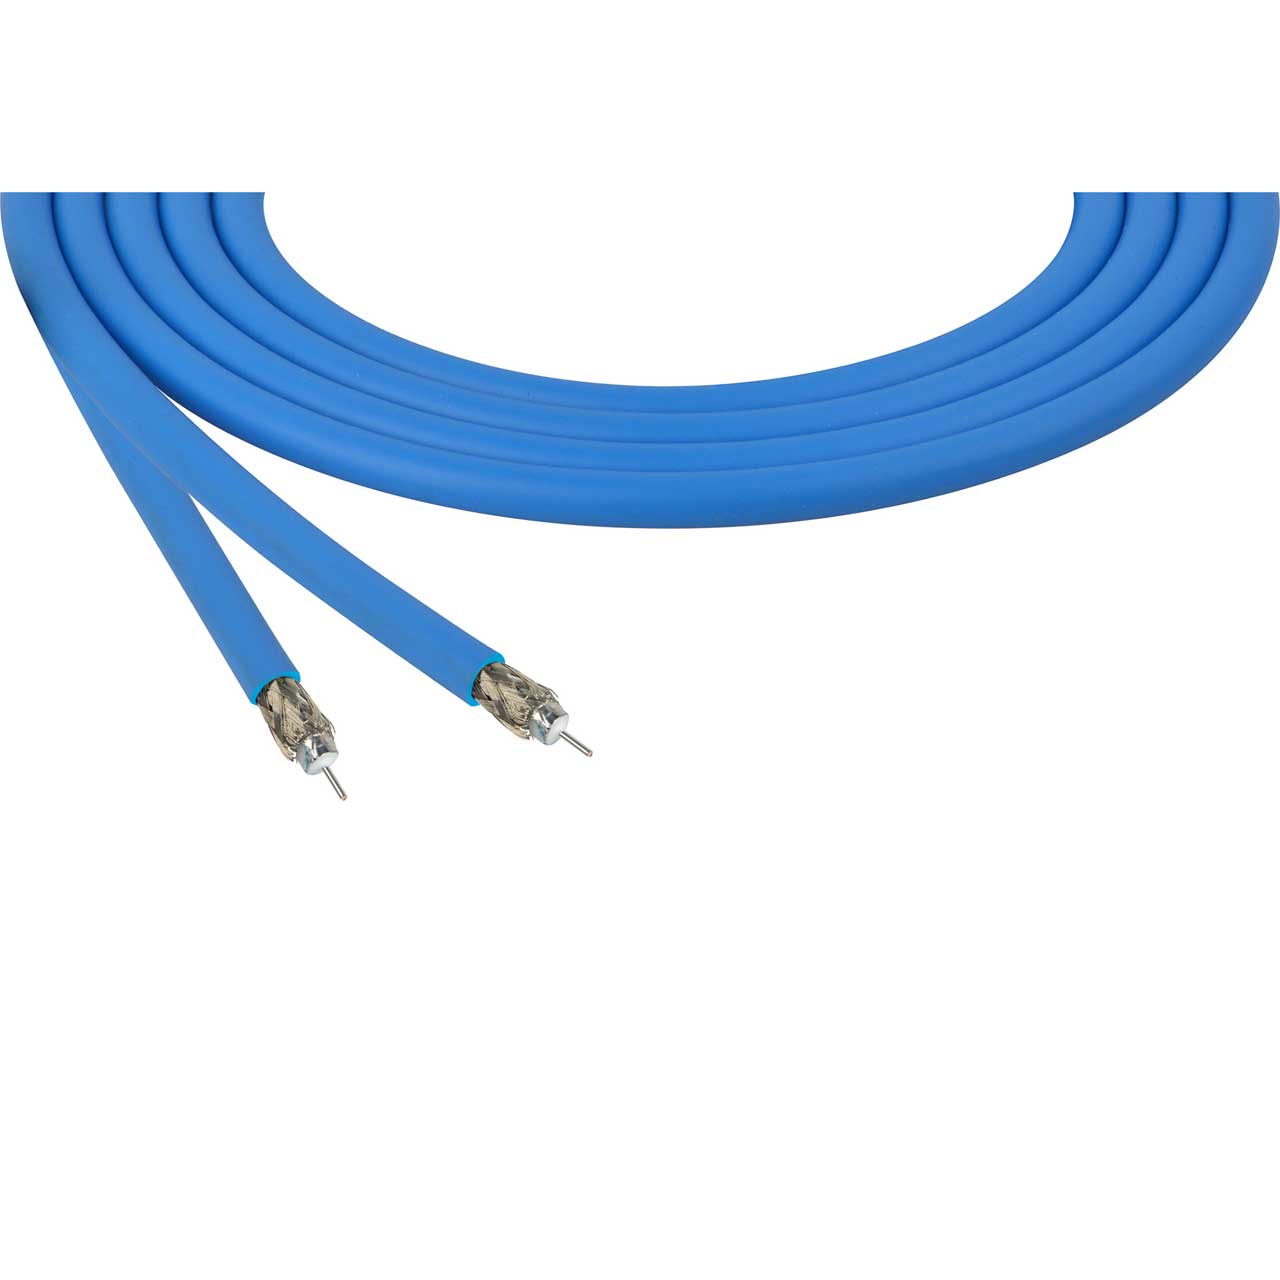 Belden 4694R 0061000 12 GHz 4K UHD 75 Ohm 18 AWG Precision Video Cable - Light Blue - Per Foot